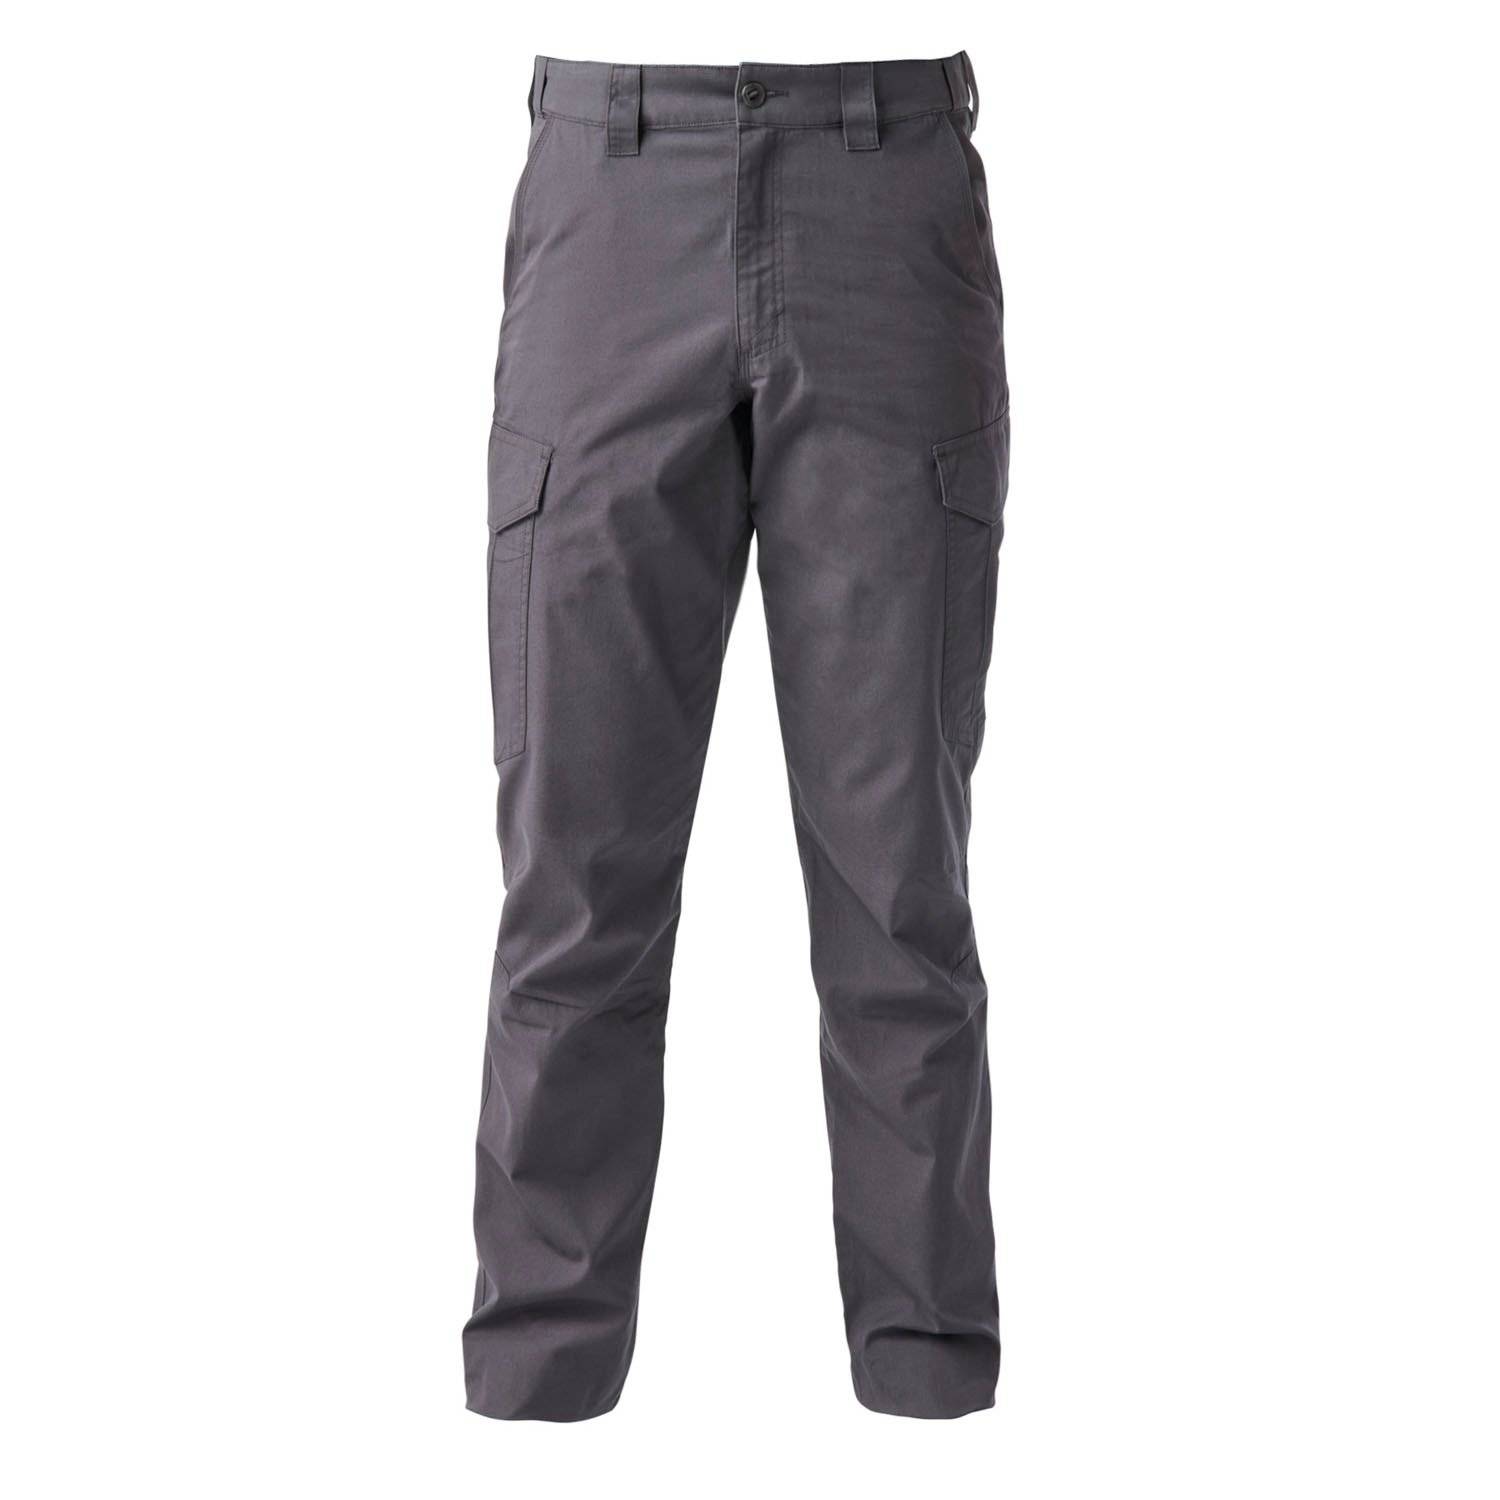 5.11 TACTICAL CONNOR CARGO PANTS